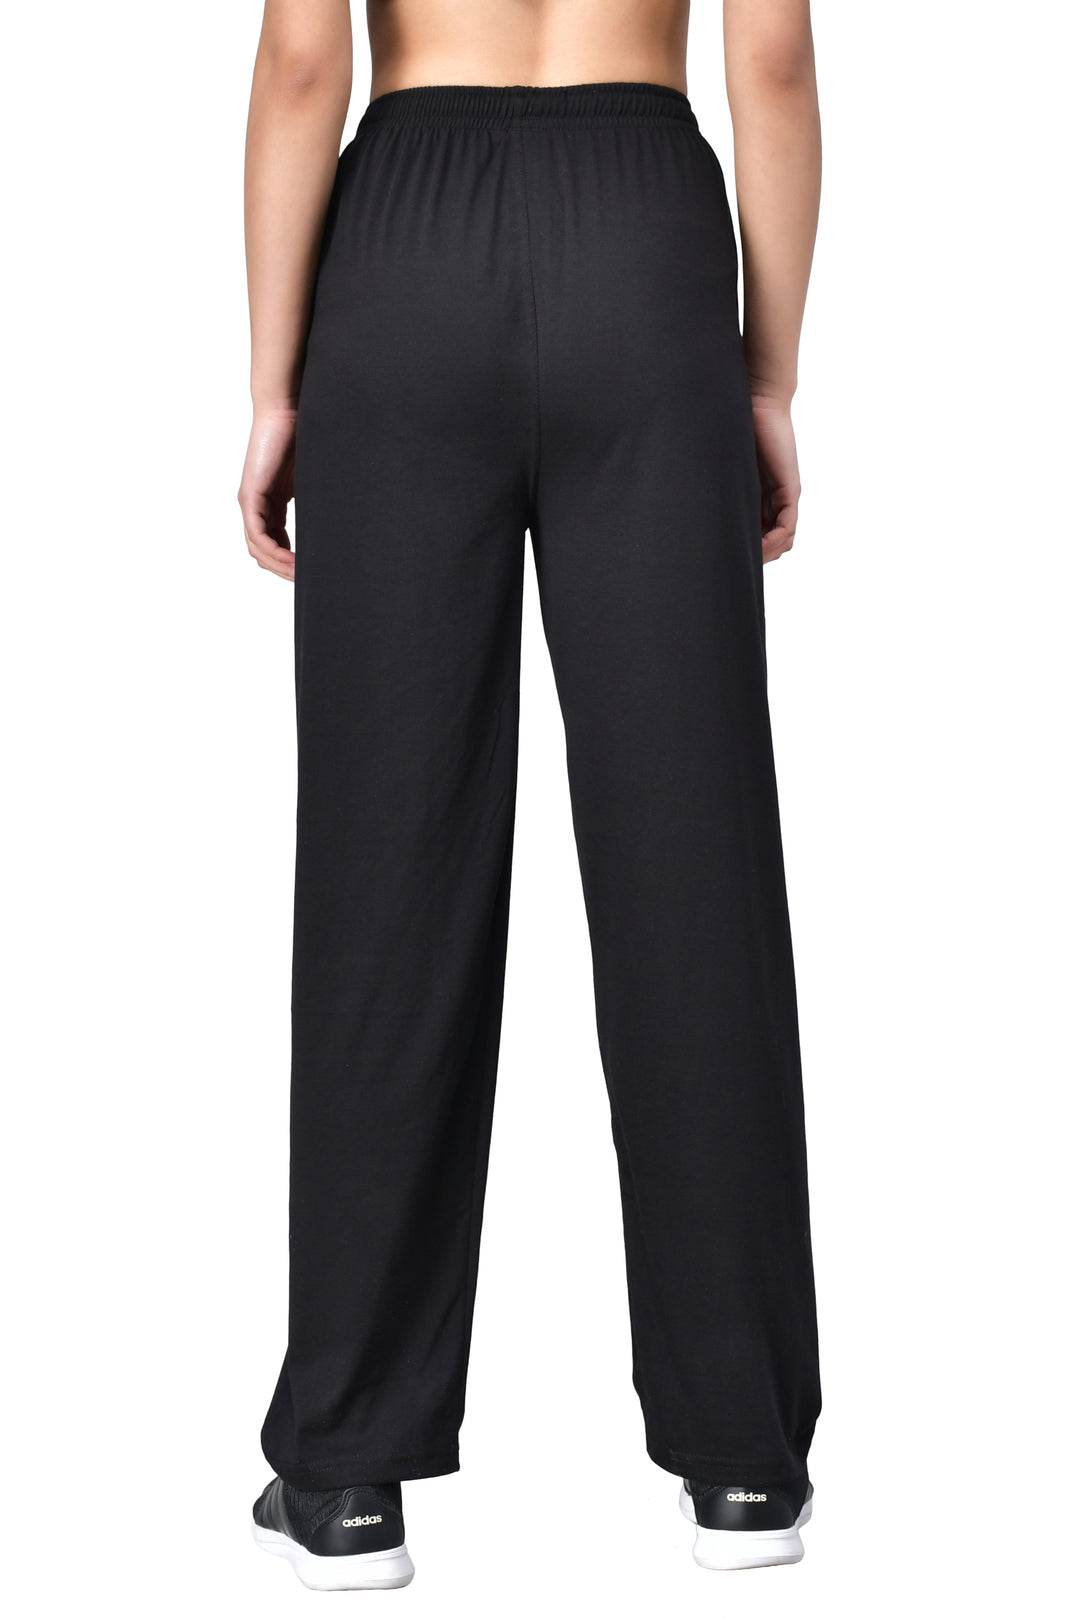 Women's Black Track Pants with Zip Pockets